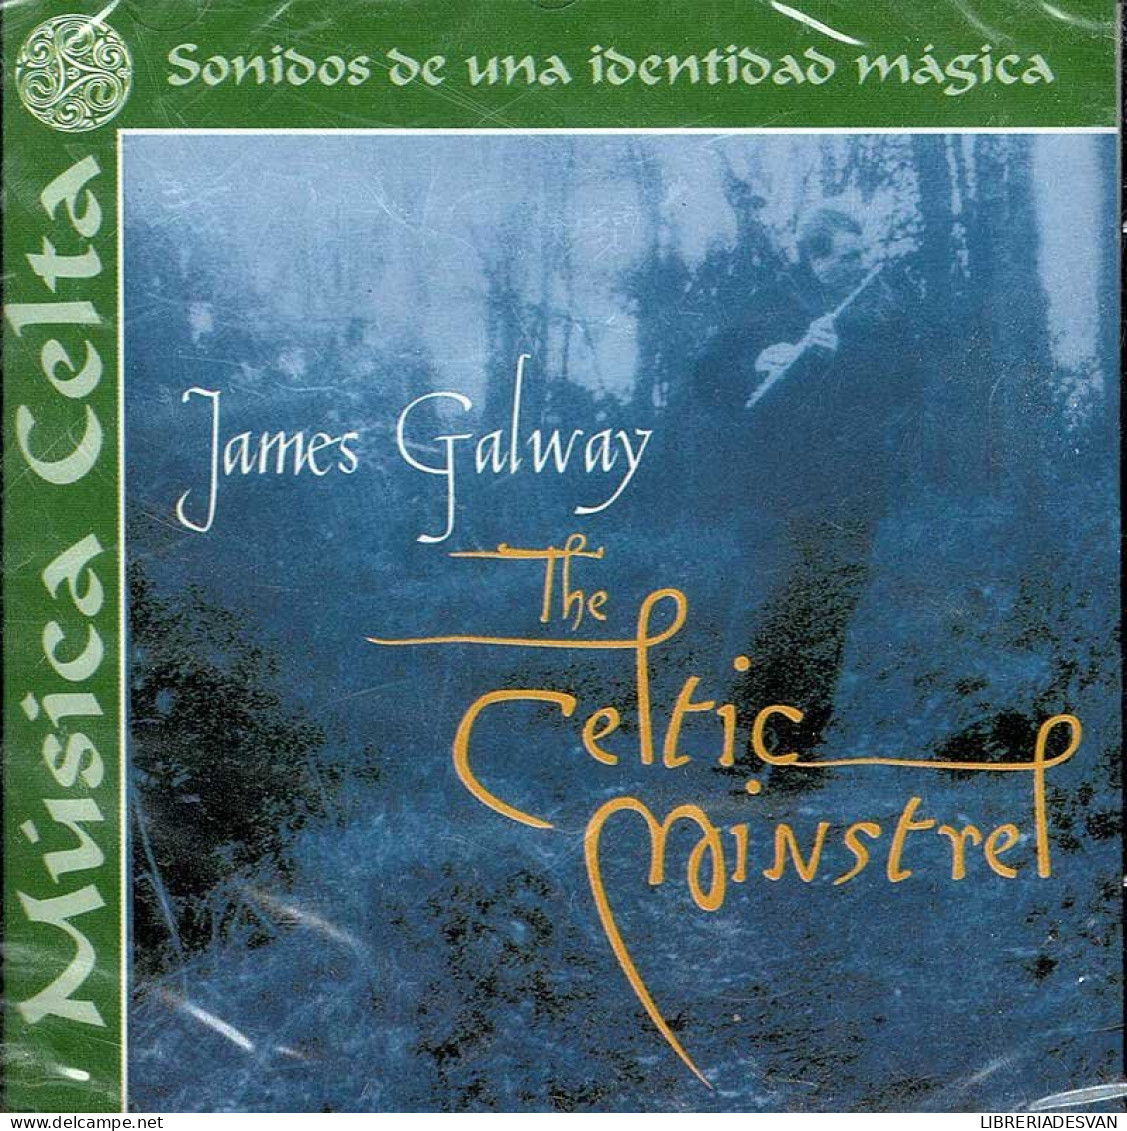 James Galway With The Chieftains & Emily Mitchell - The Celtic Minstrel. CD - Country Et Folk